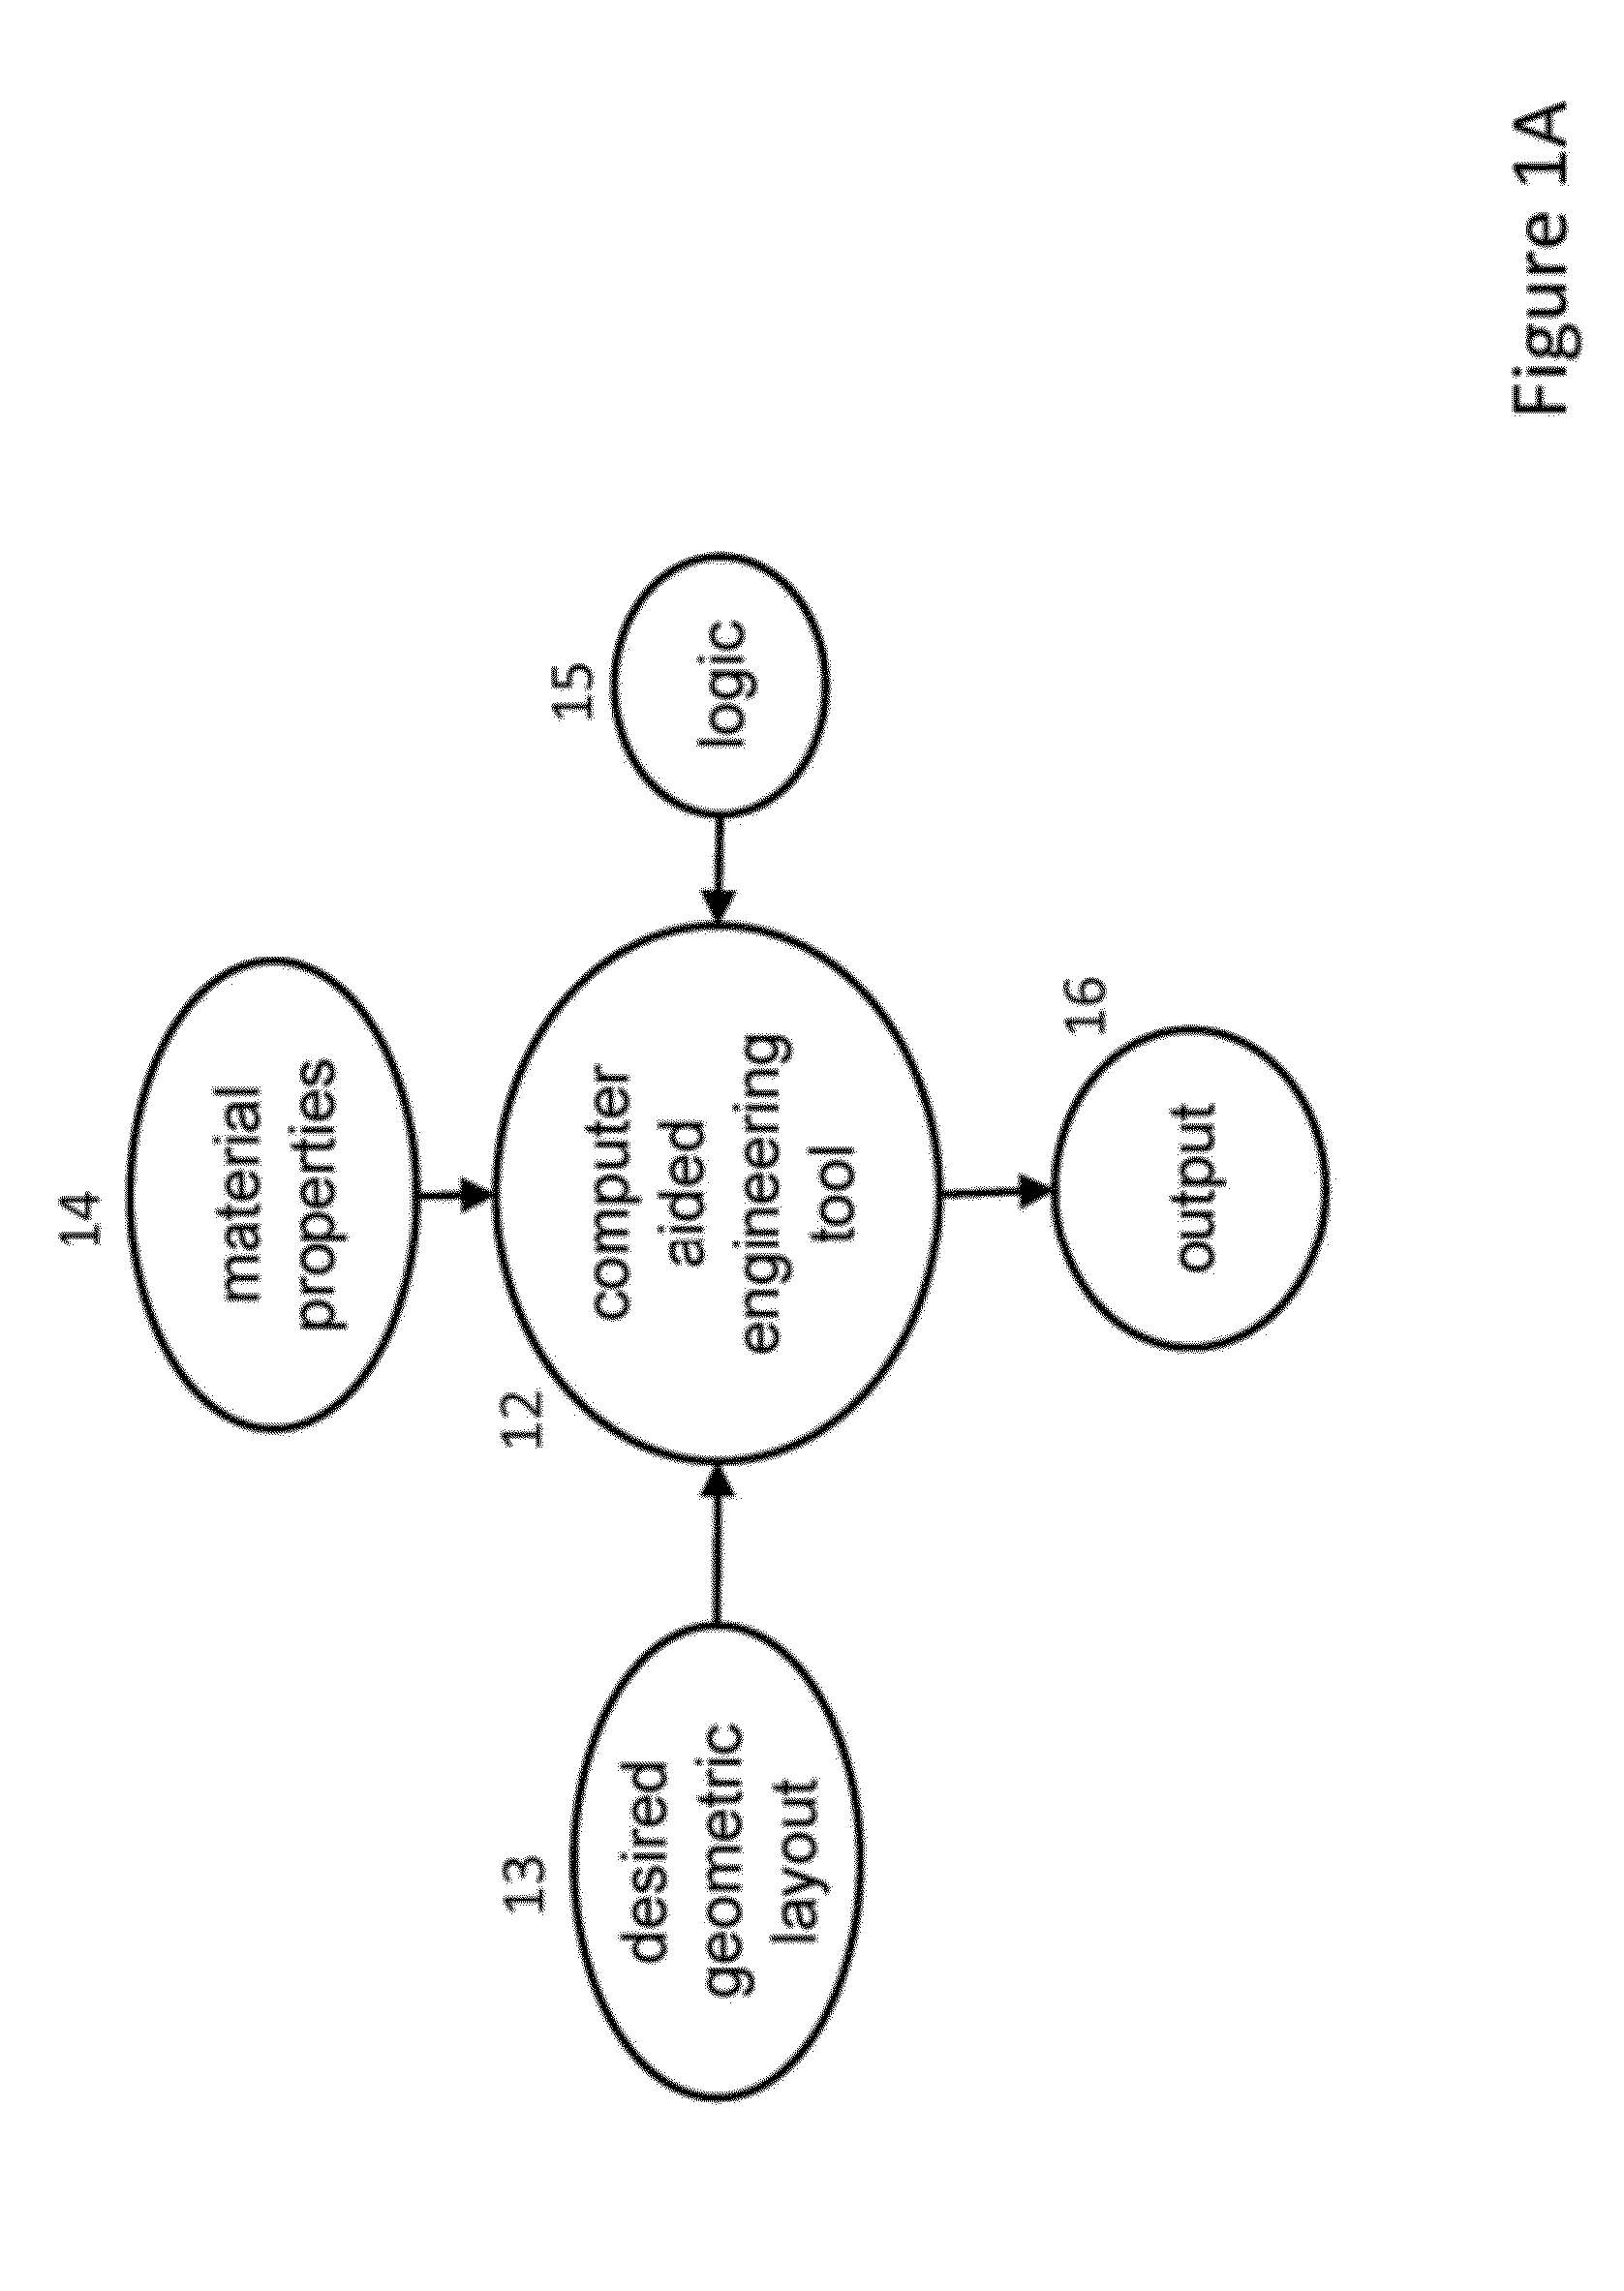 Methods of inverse determination of material properties of an electrochemical system